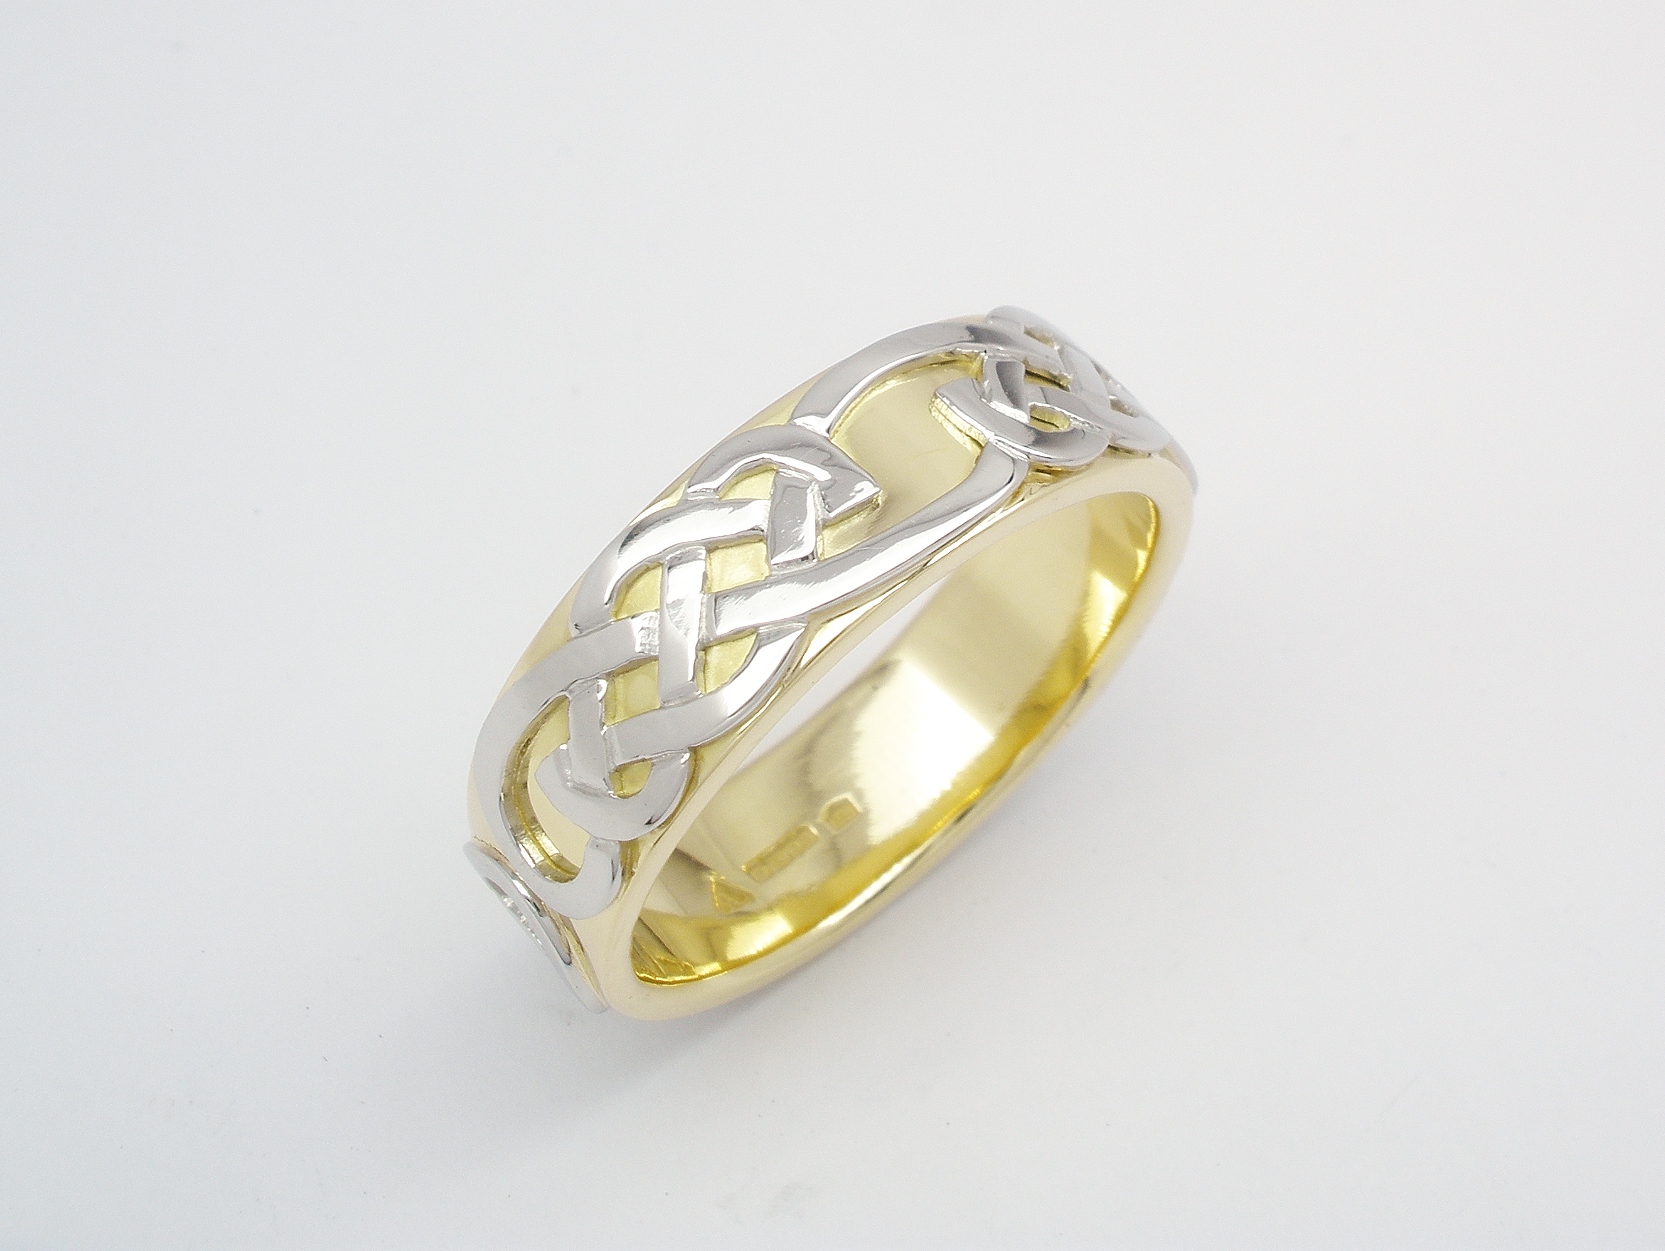 A gents 18ct yellow gold ring with a platinum Celtic motif overlay.